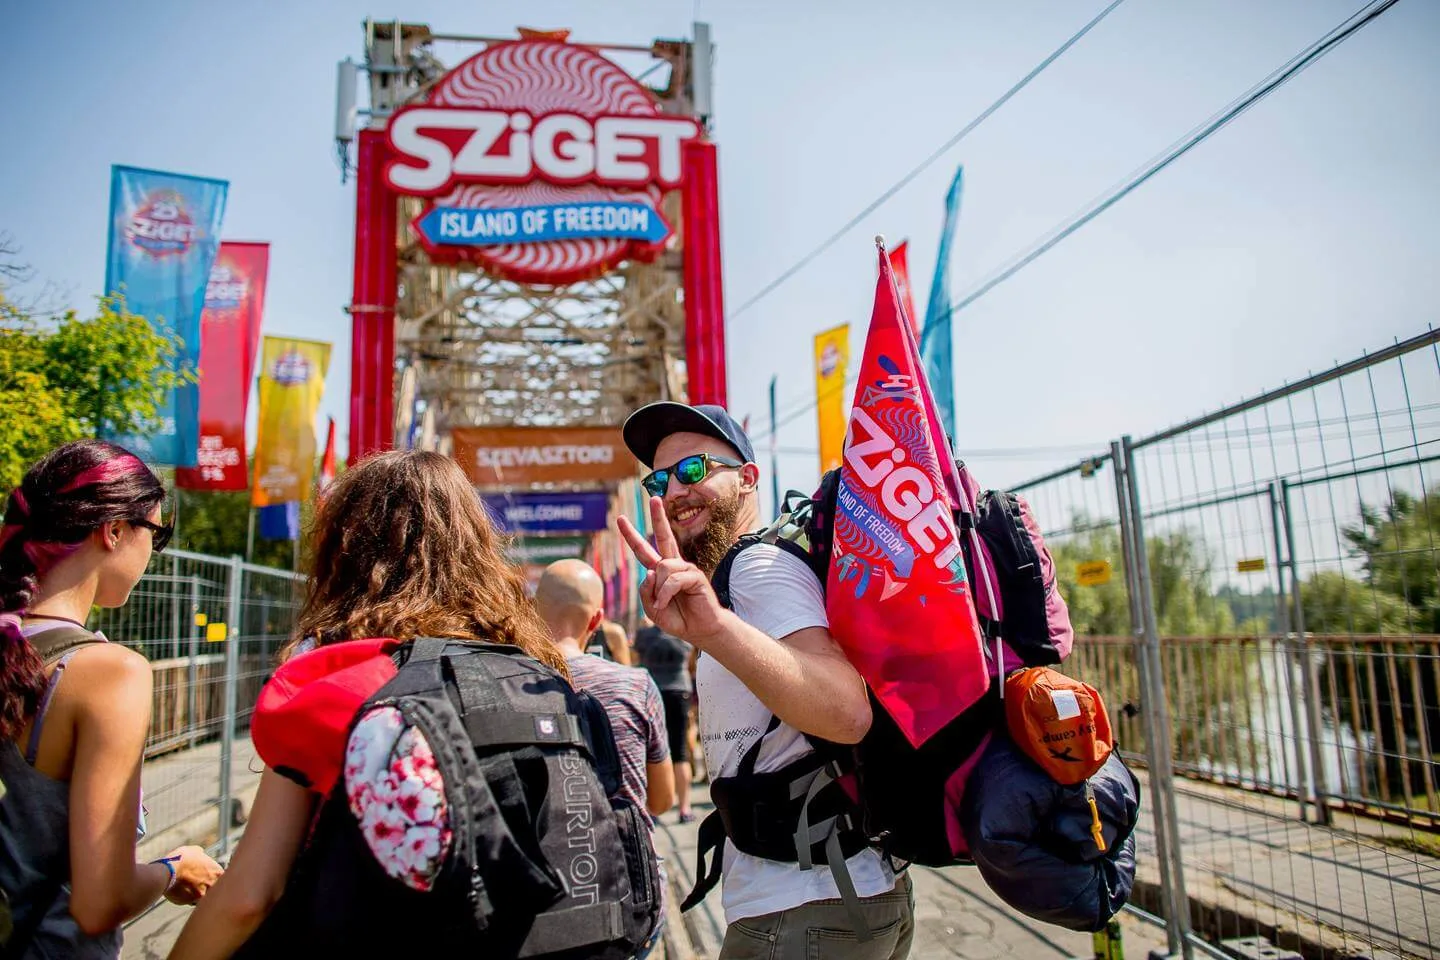 review of sziget festival